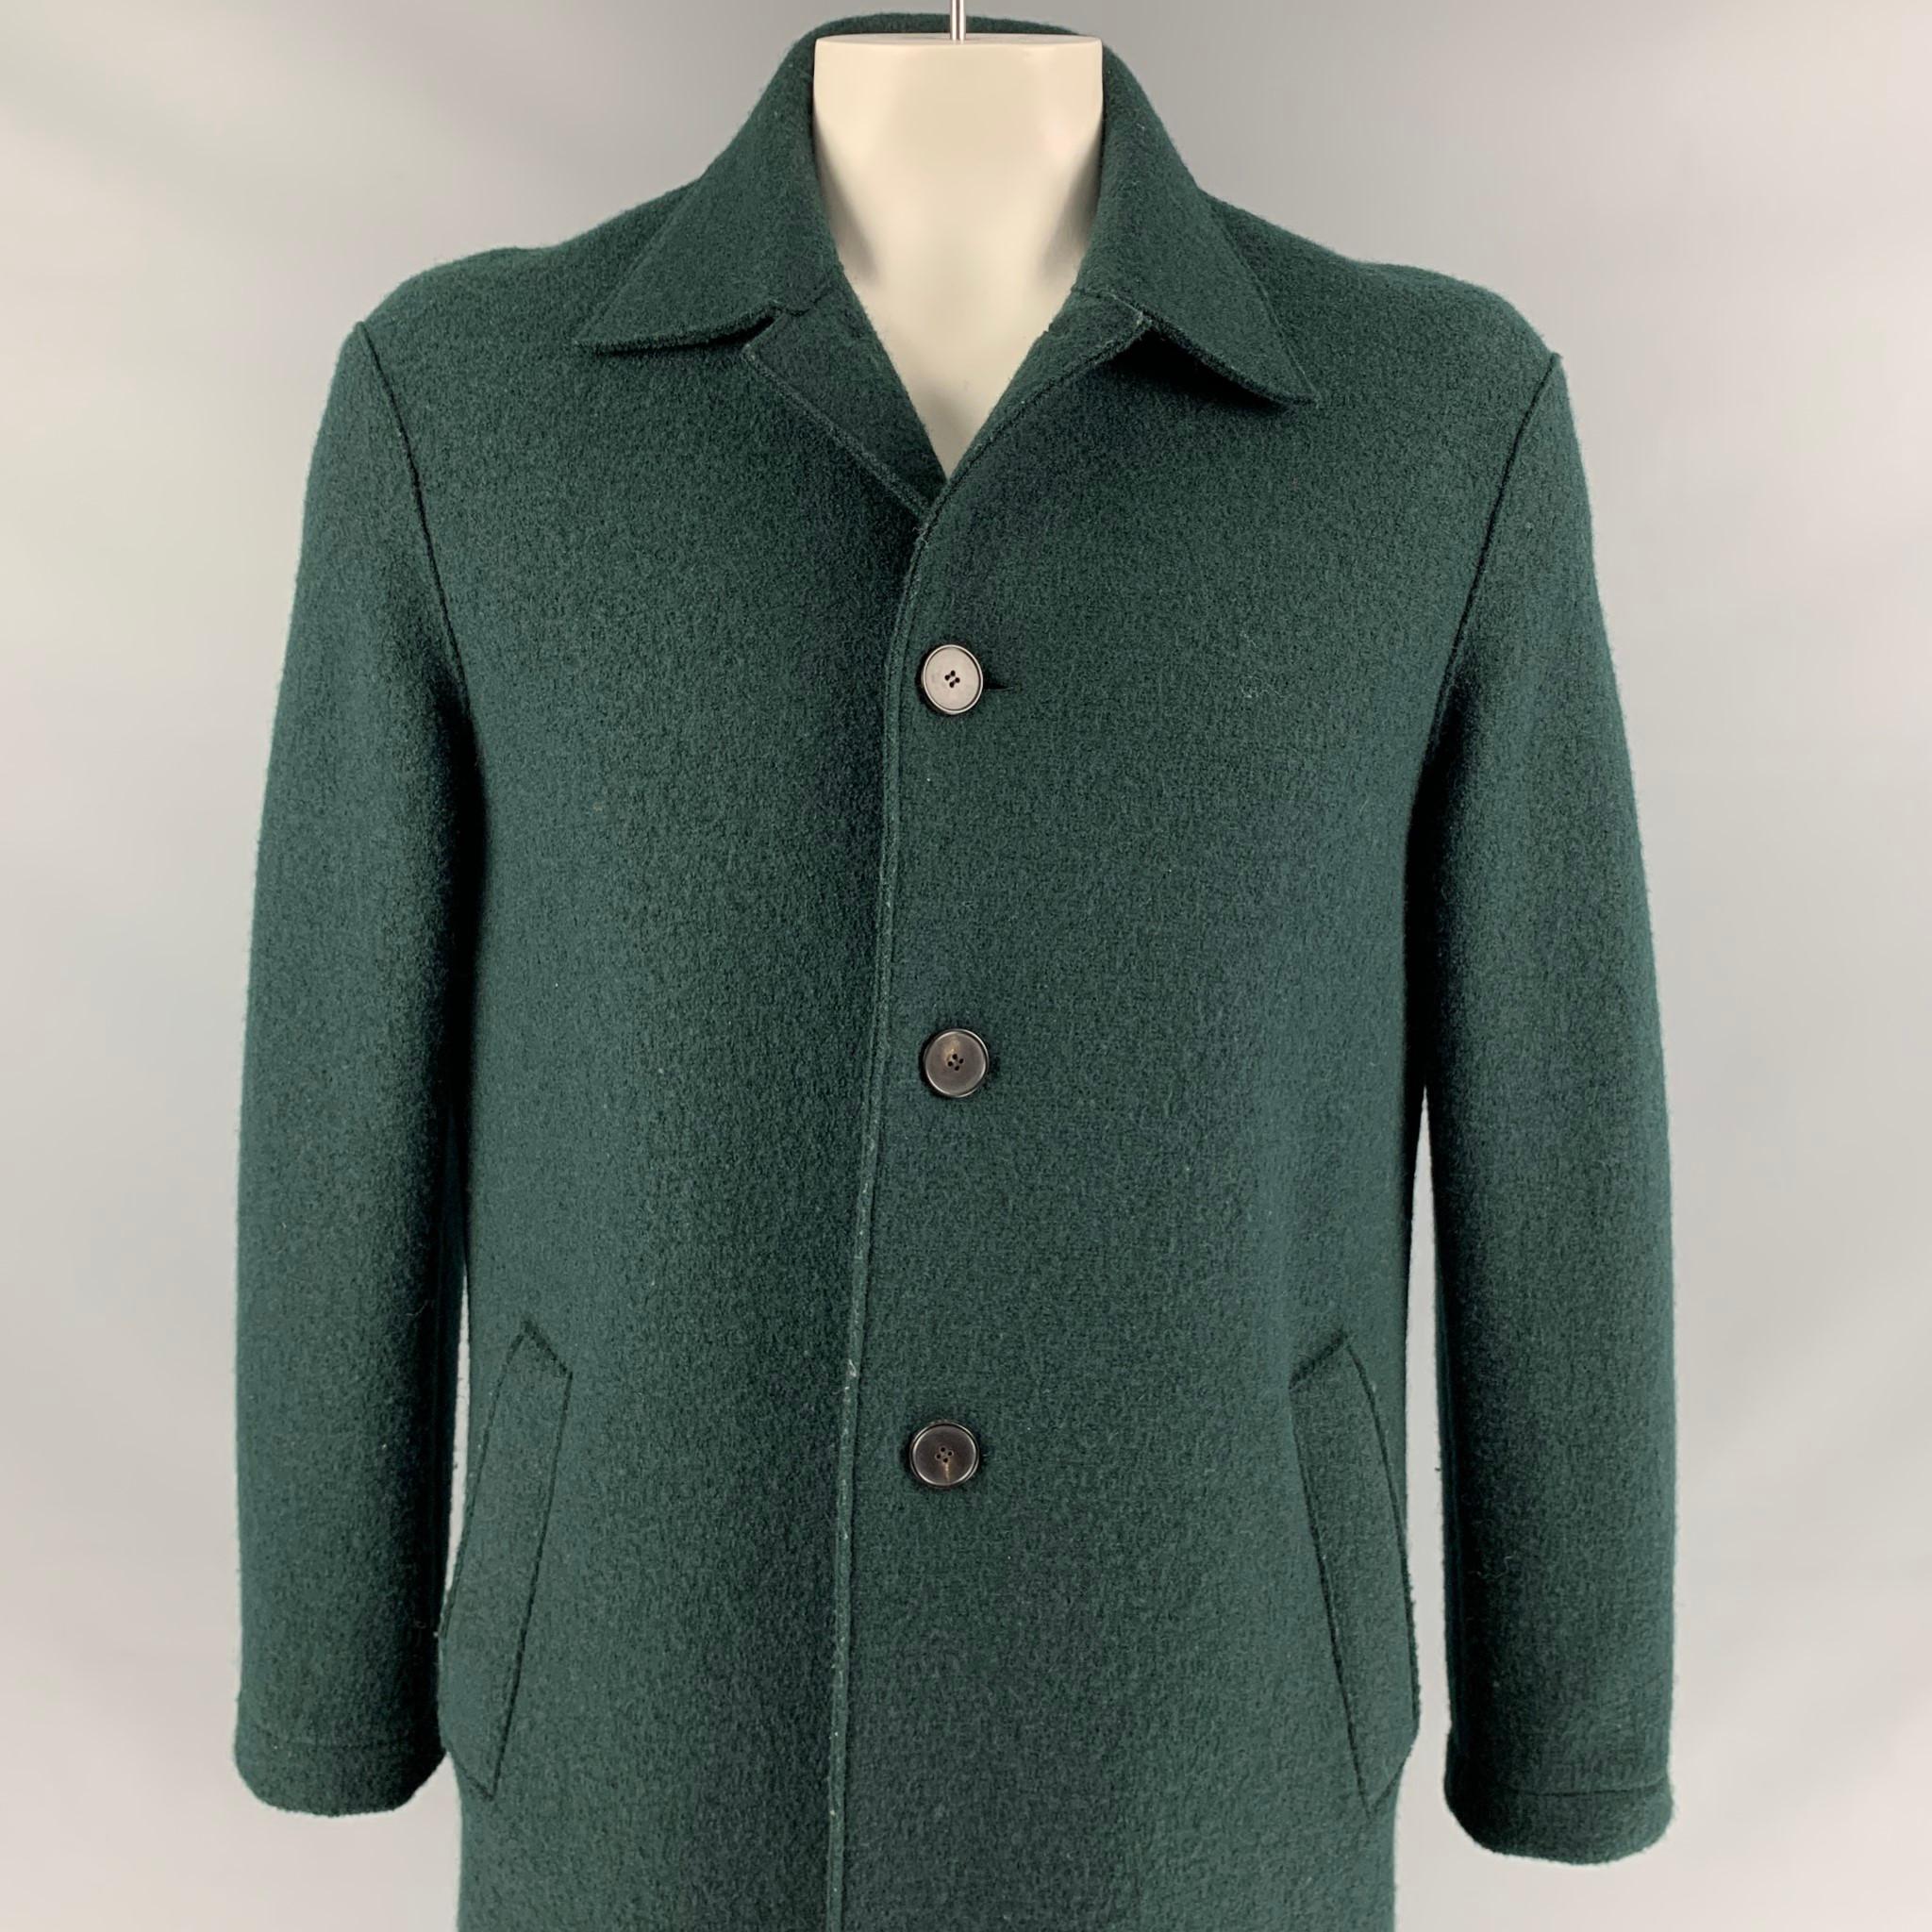 HARRIS WHARF LONDON coat comes in a forest green textured wool featuring a pointed collar, slit pockets, single back vent, and a buttoned closure. Made in Italy.

Very Good Pre-Owned Condition.
Marked: 52

Measurements:

Shoulder: 21 in.
Chest: 44